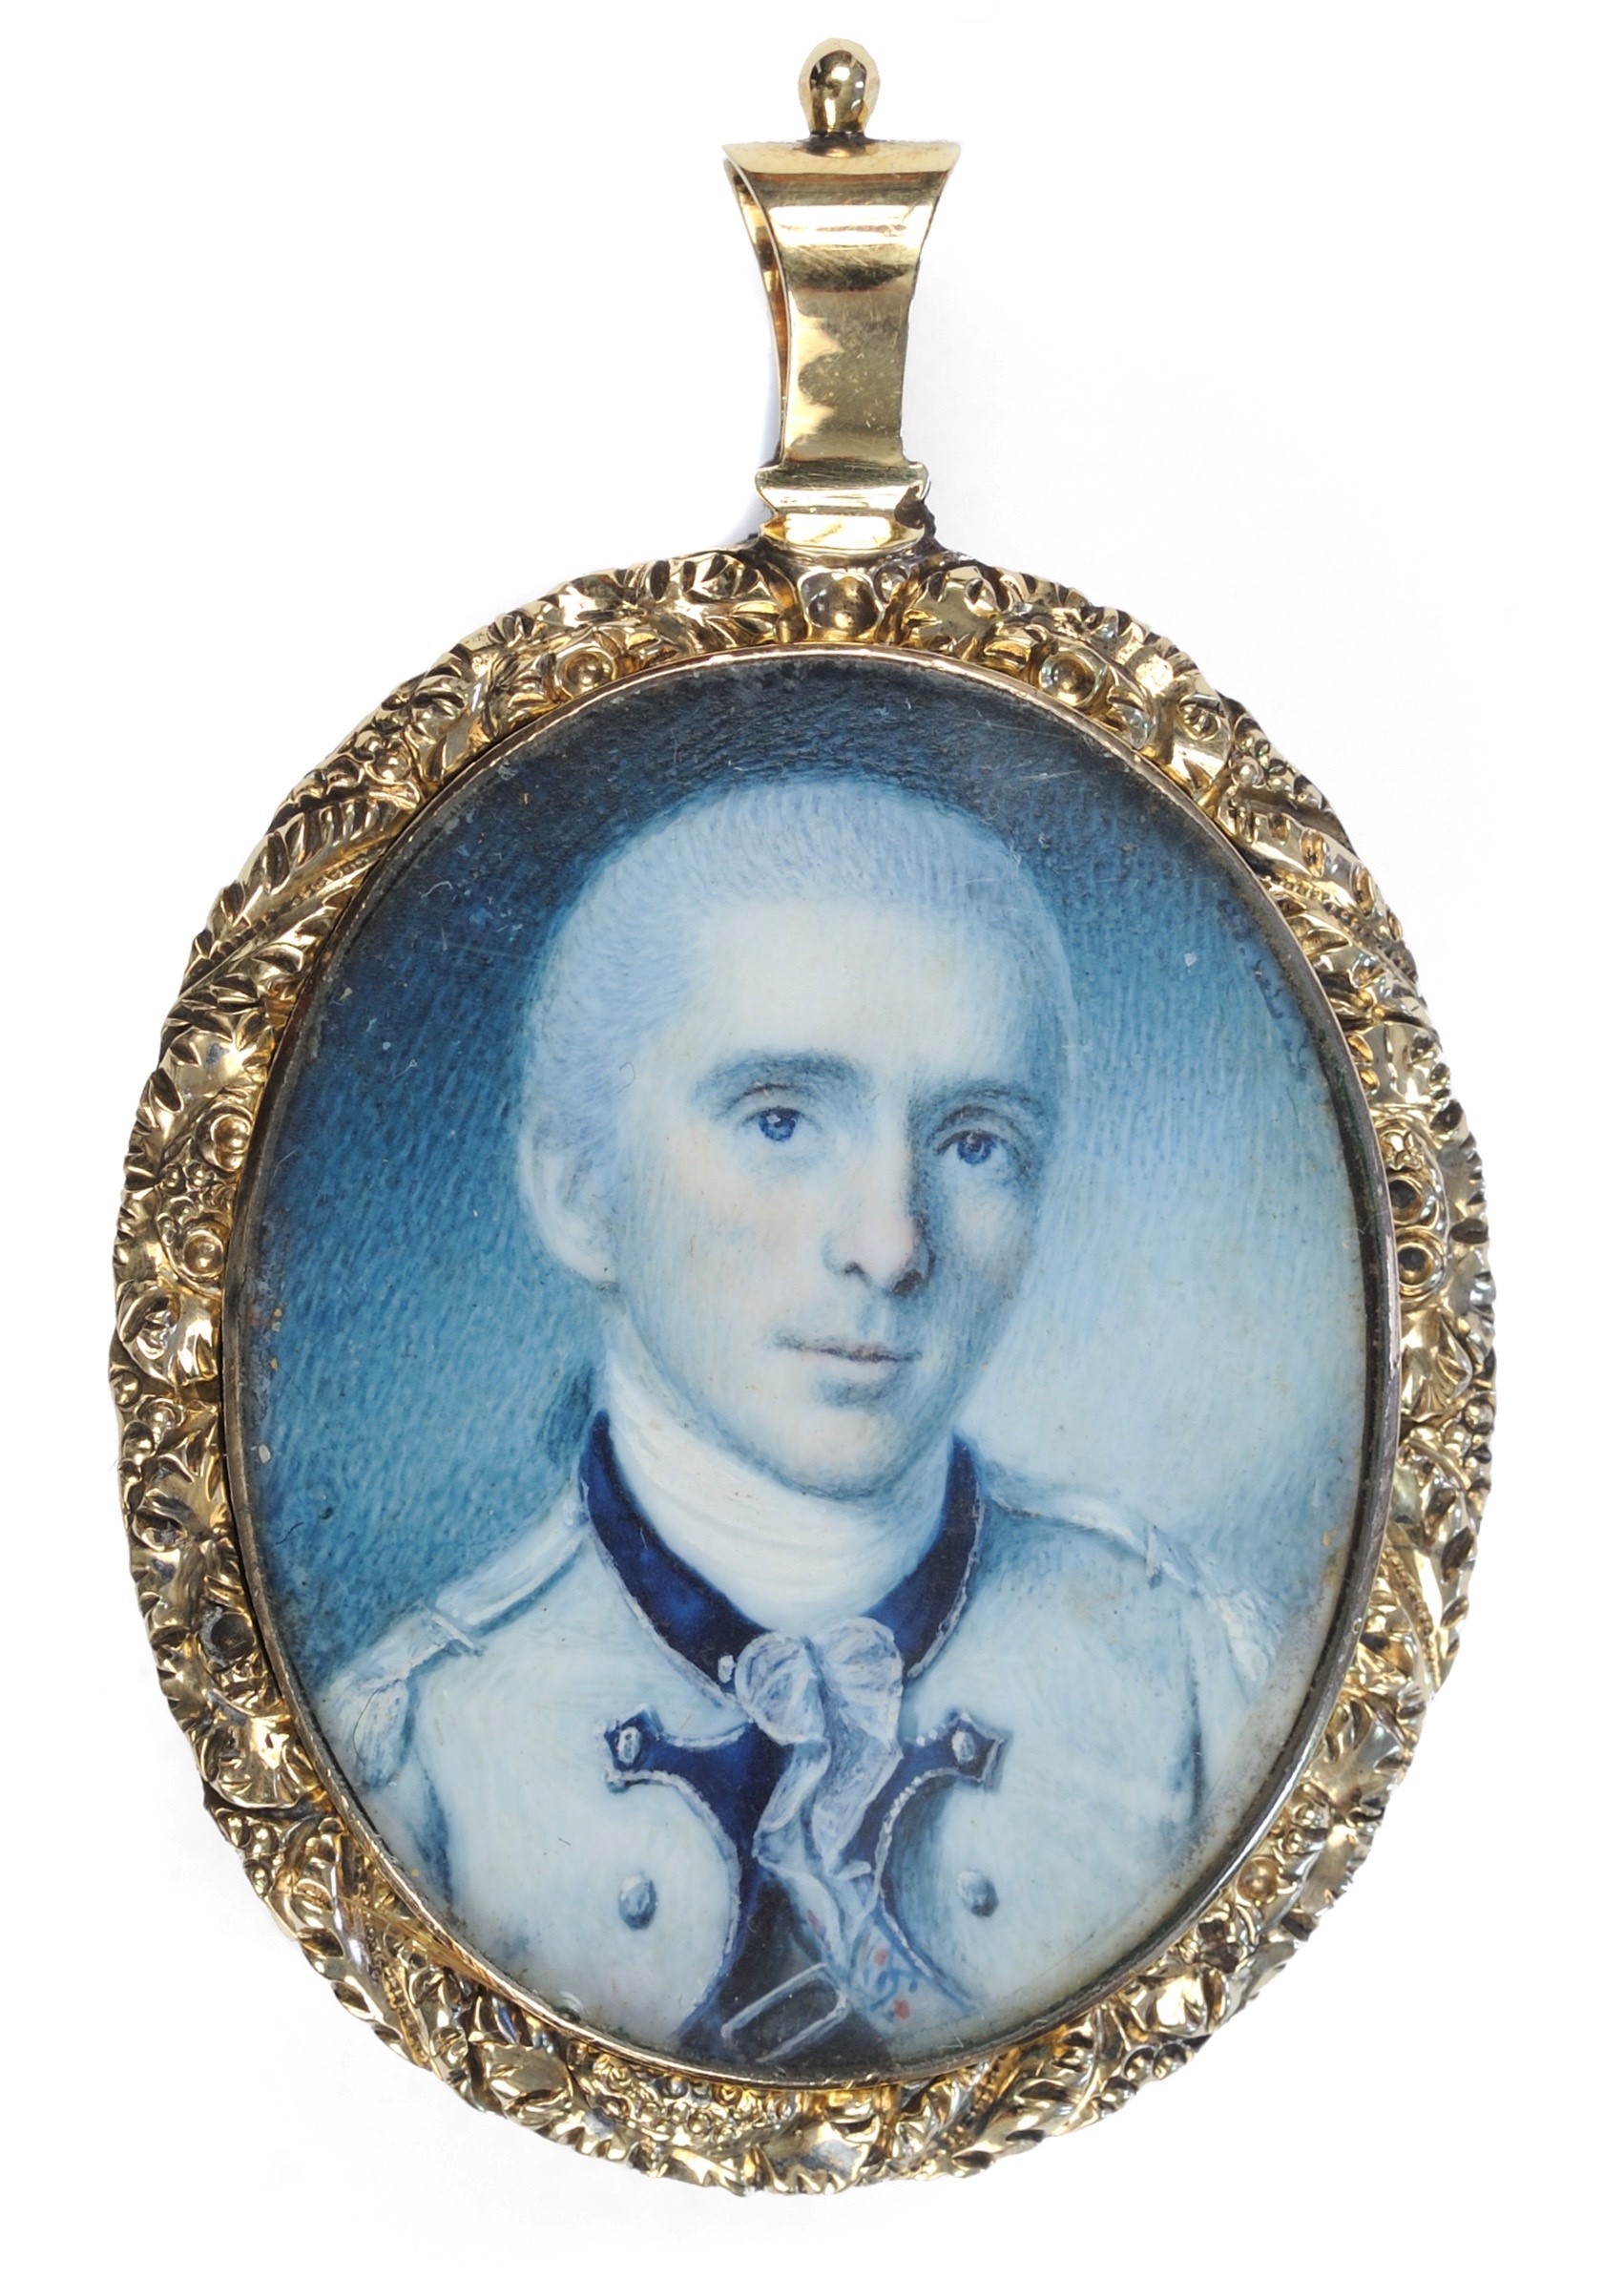 Oval portrait miniature of Revolutionary War officer George Baylor painted by Charles Willson Peale, 1778